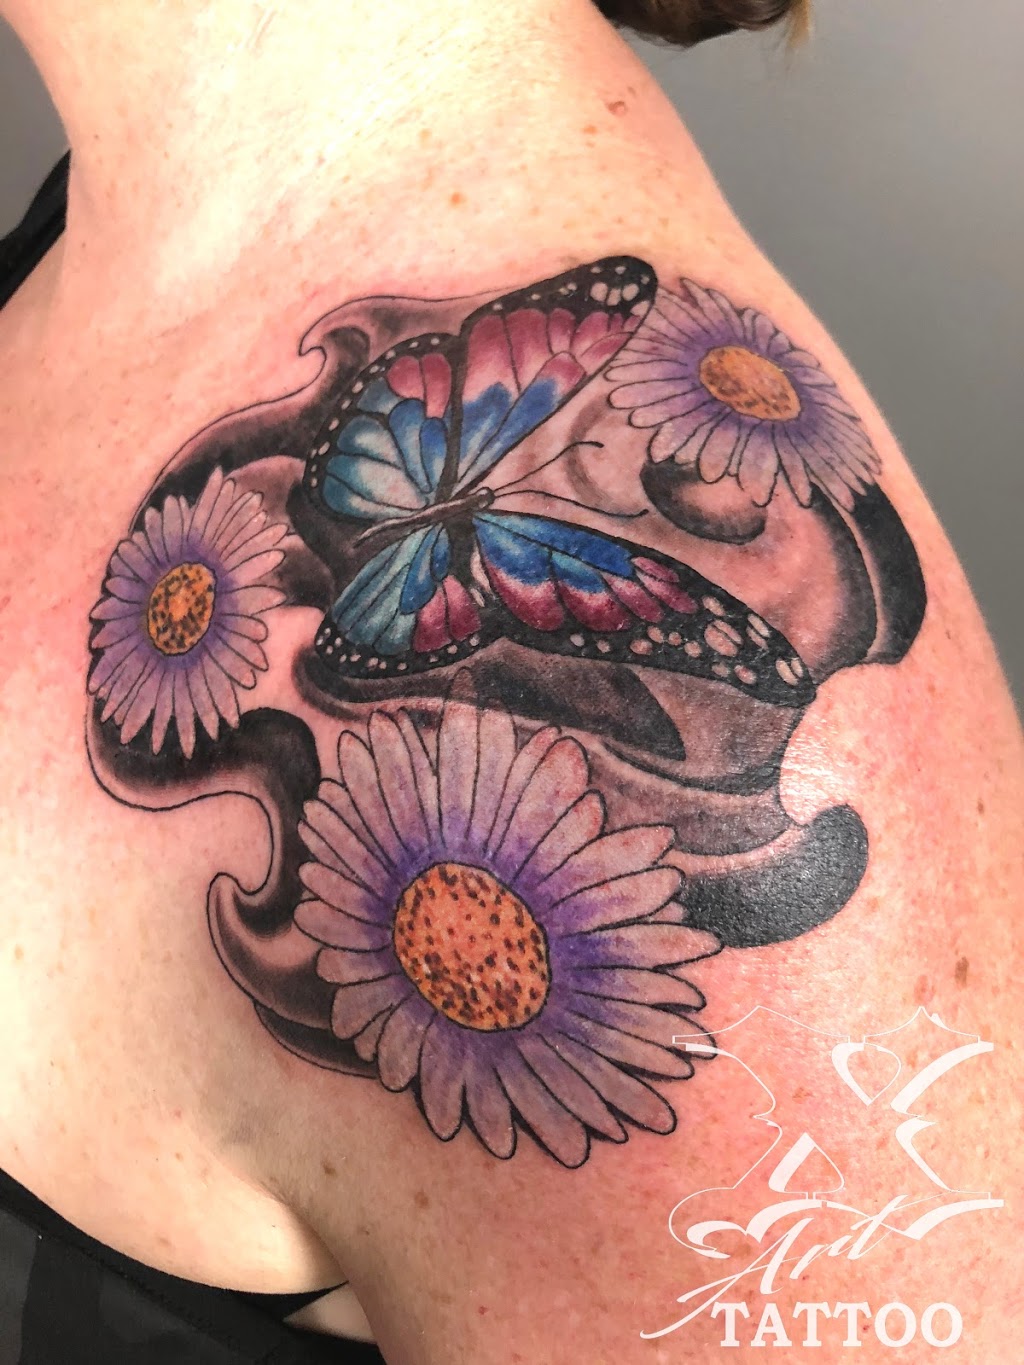 Excessive Art Tattooing - Tattoo Artists In Shepparton | store | 179 Corio St, Shepparton VIC 3630, Australia | 0358216215 OR +61 3 5821 6215